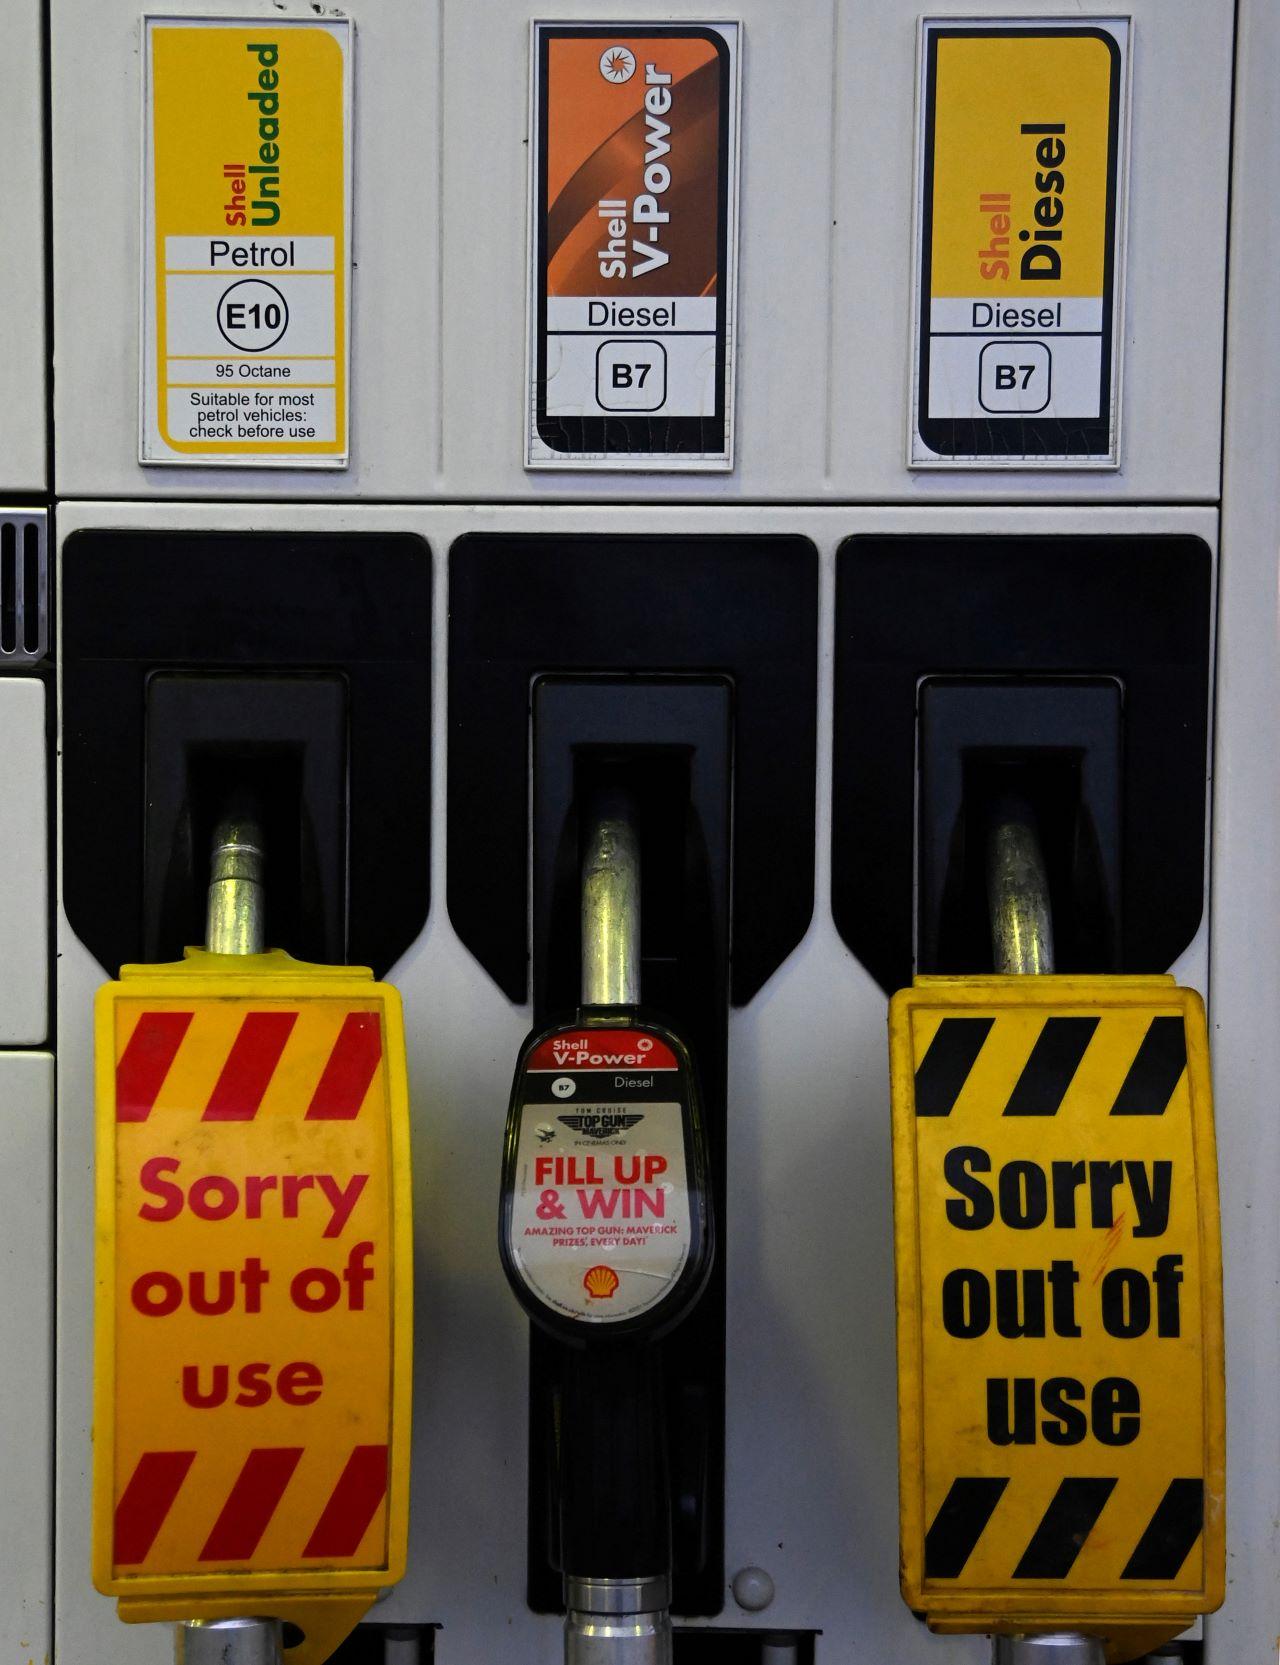 Out of use signs are placed over pumps at a Shell petrol station in London, Britain, Sept 24. Photo: Reuters